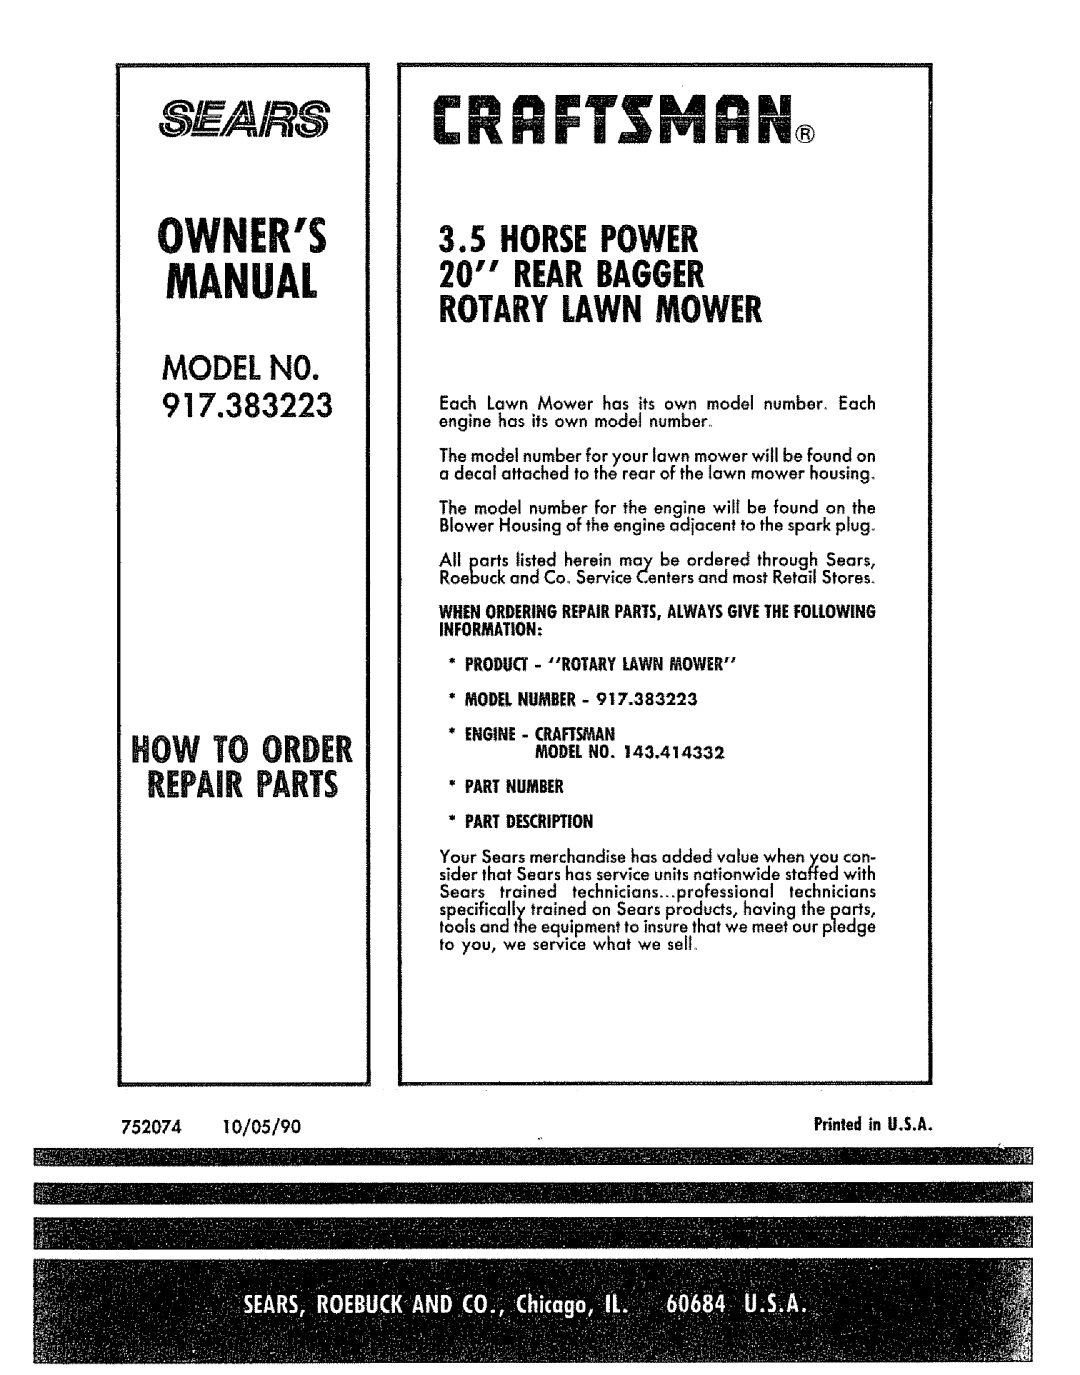 Sears manual 3.5HORSEPOWER 20 REARBAGGER ROTARYLAWNMOWER, Owners, MODELNO 917.383223 HOW TO ORDER REPAIRPARTS 